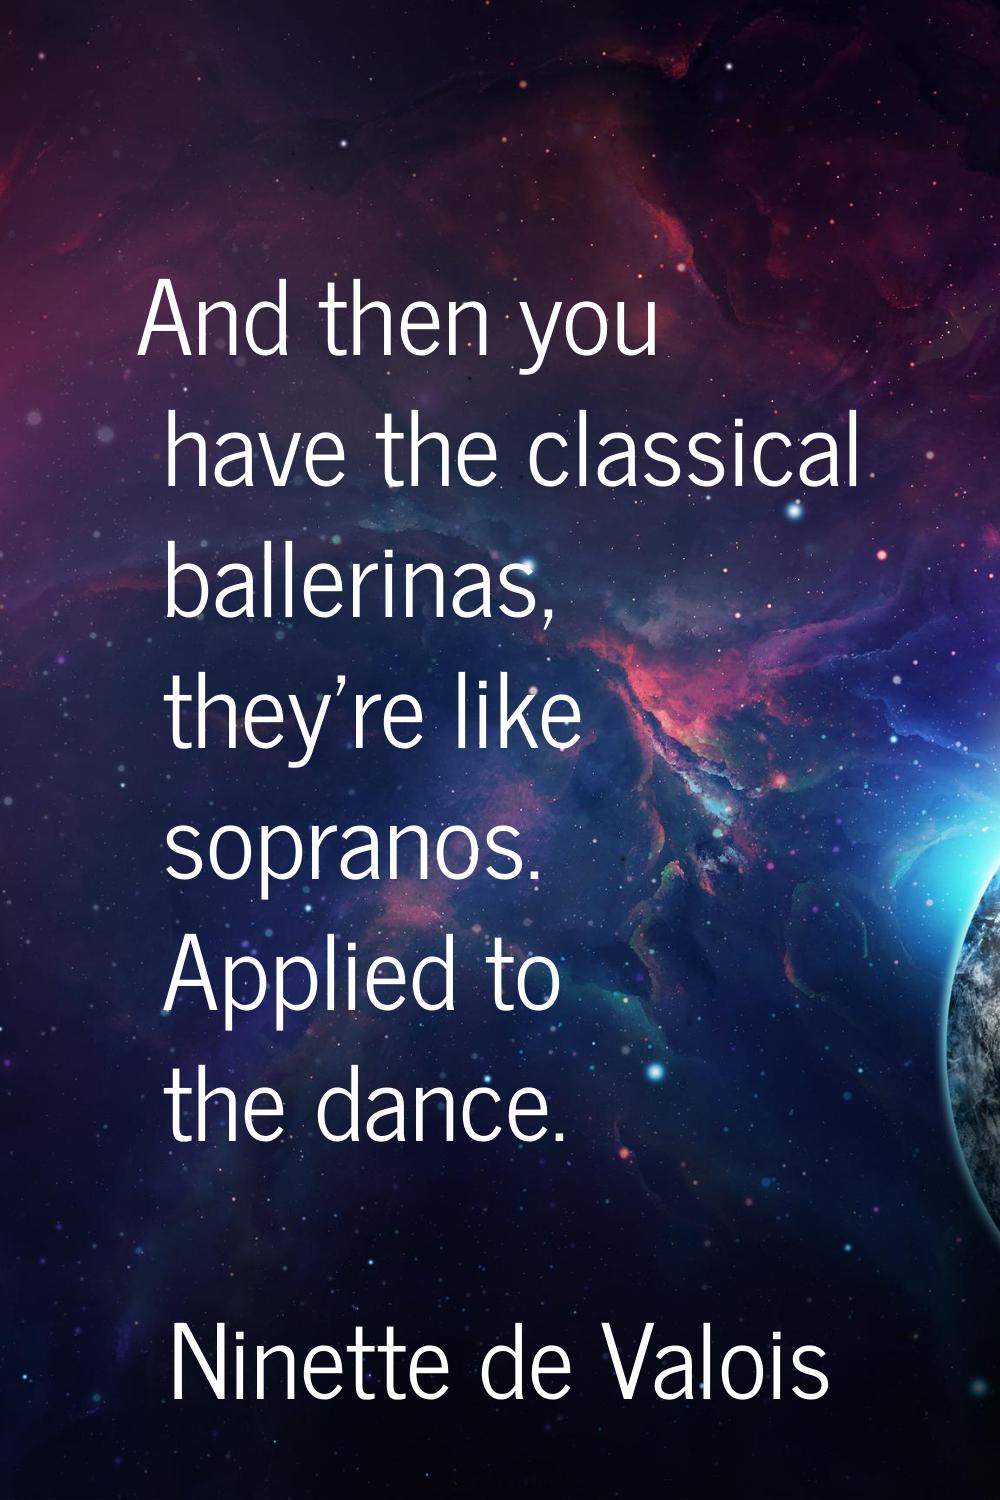 And then you have the classical ballerinas, they're like sopranos. Applied to the dance.